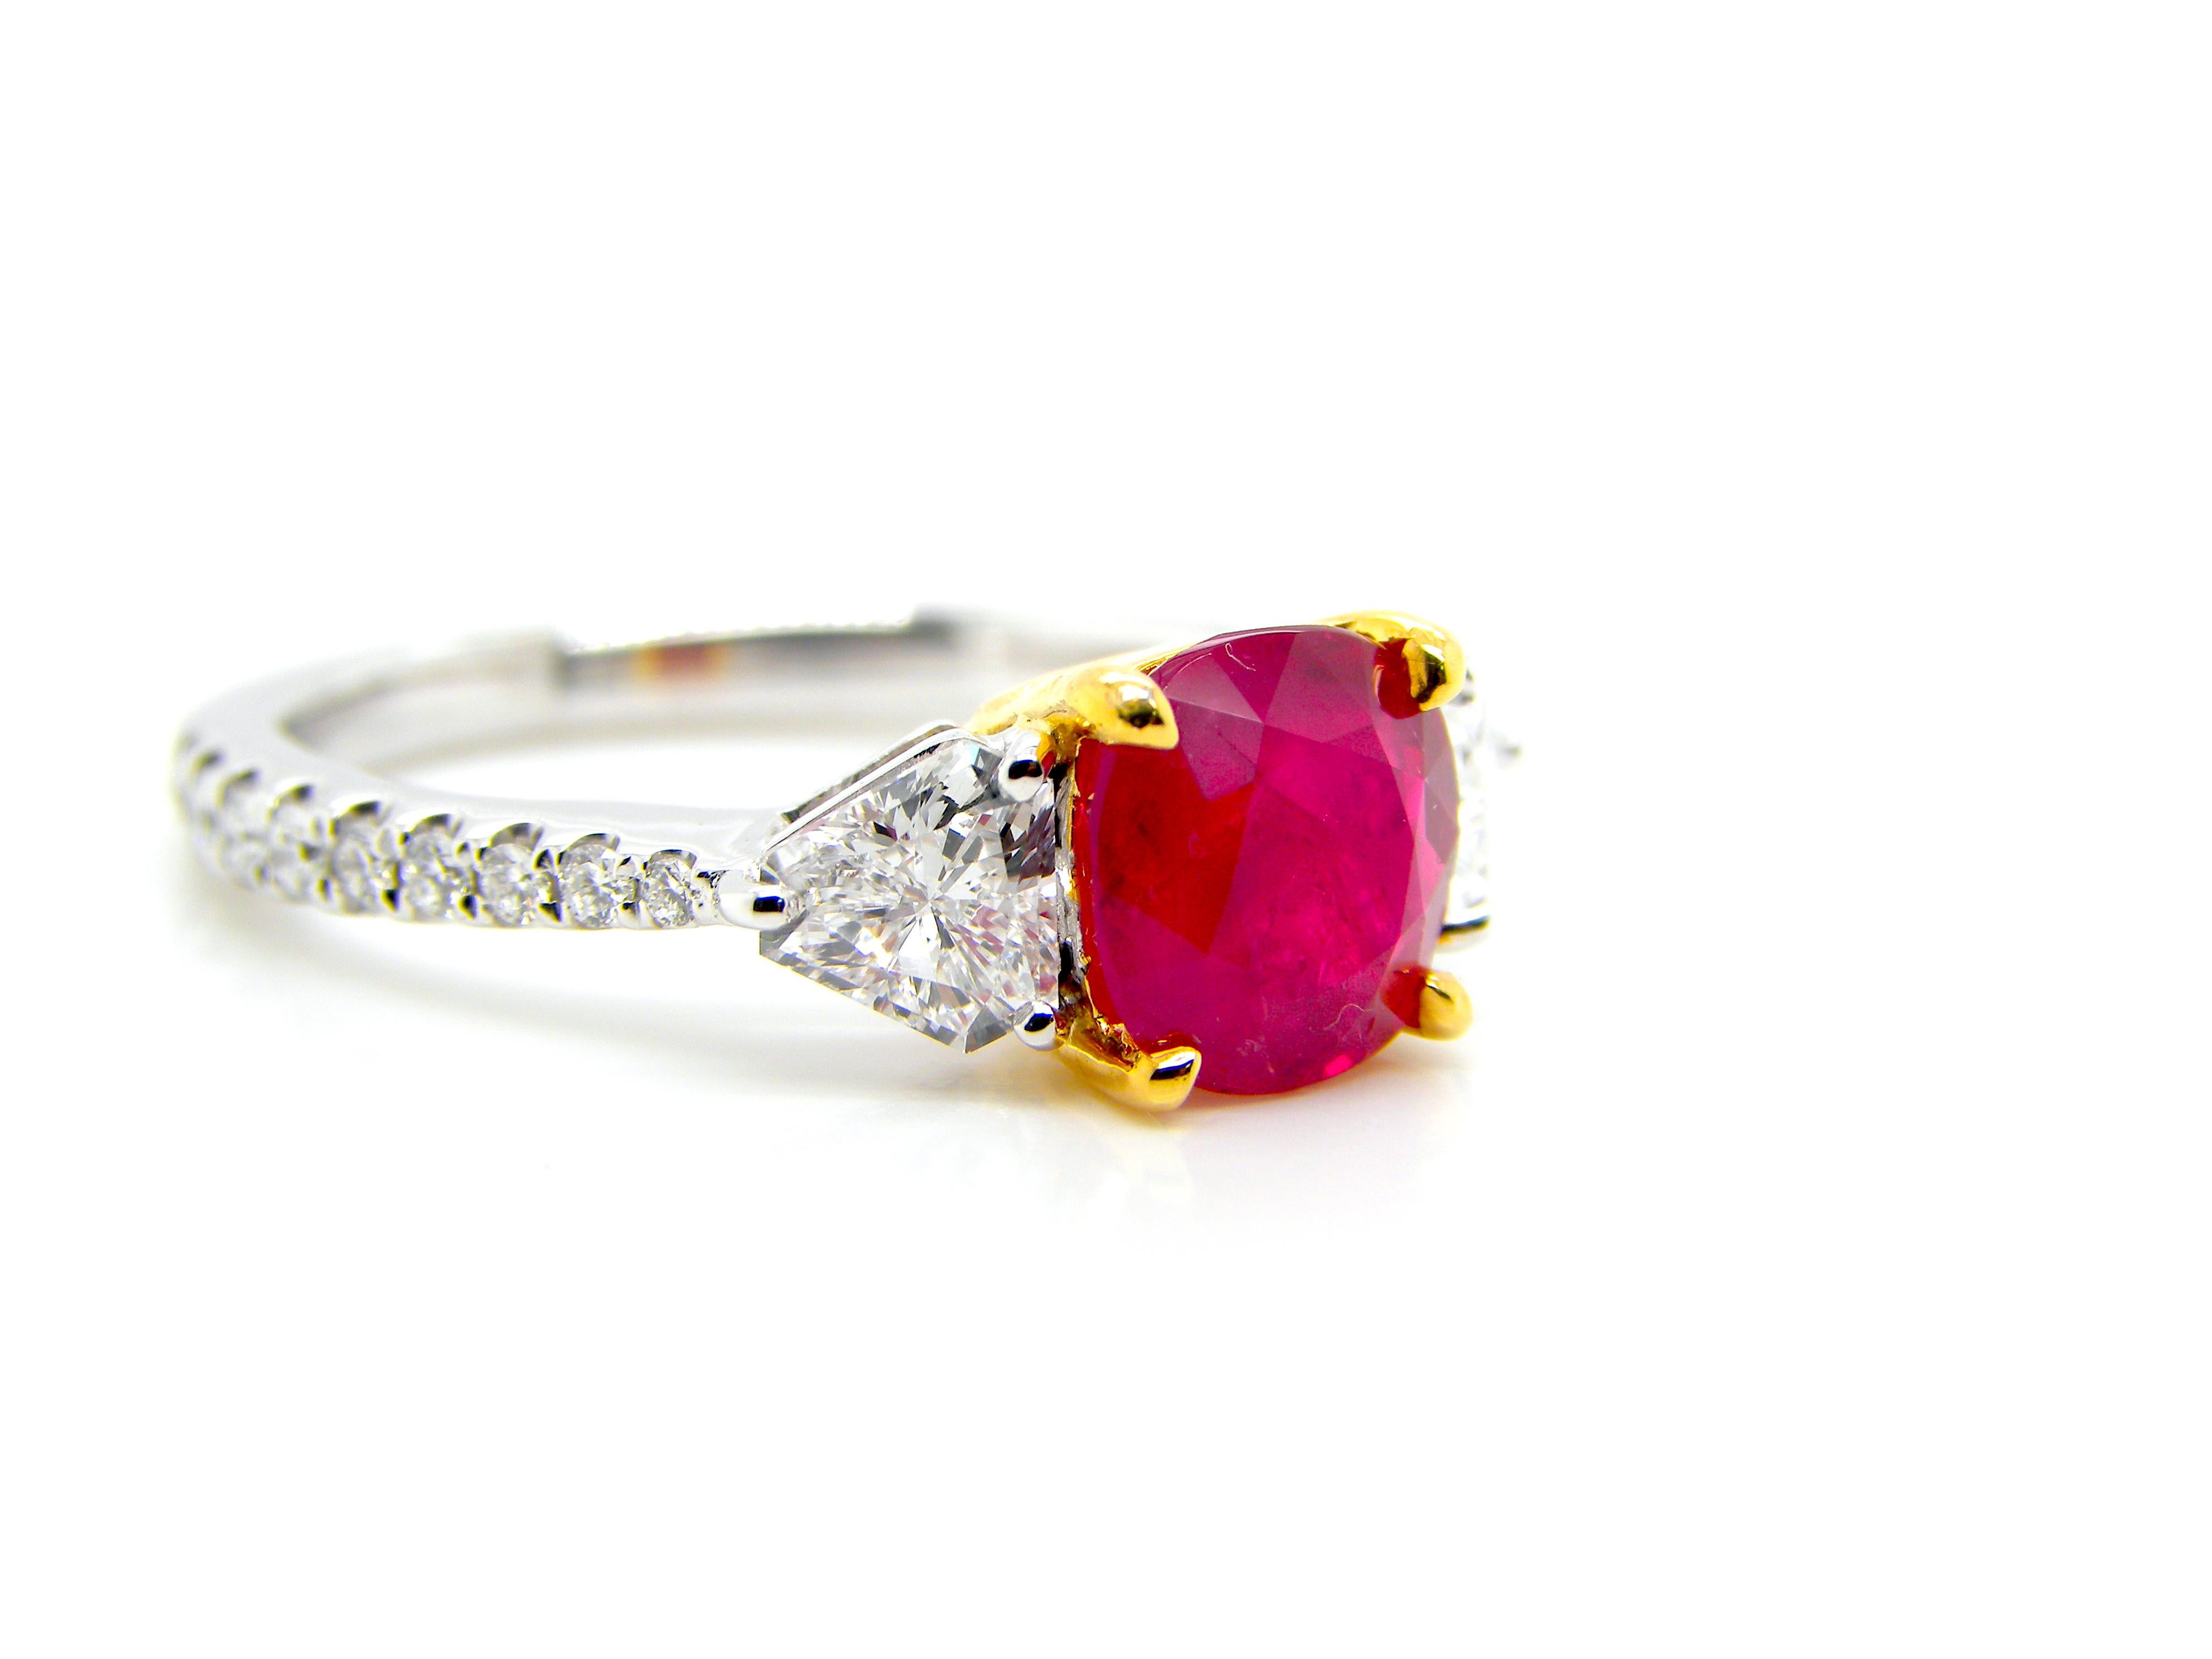 Women's or Men's 1.93 Carat GIA Certified Burma No Heat Pigeon's Blood Red Ruby and Diamond Ring